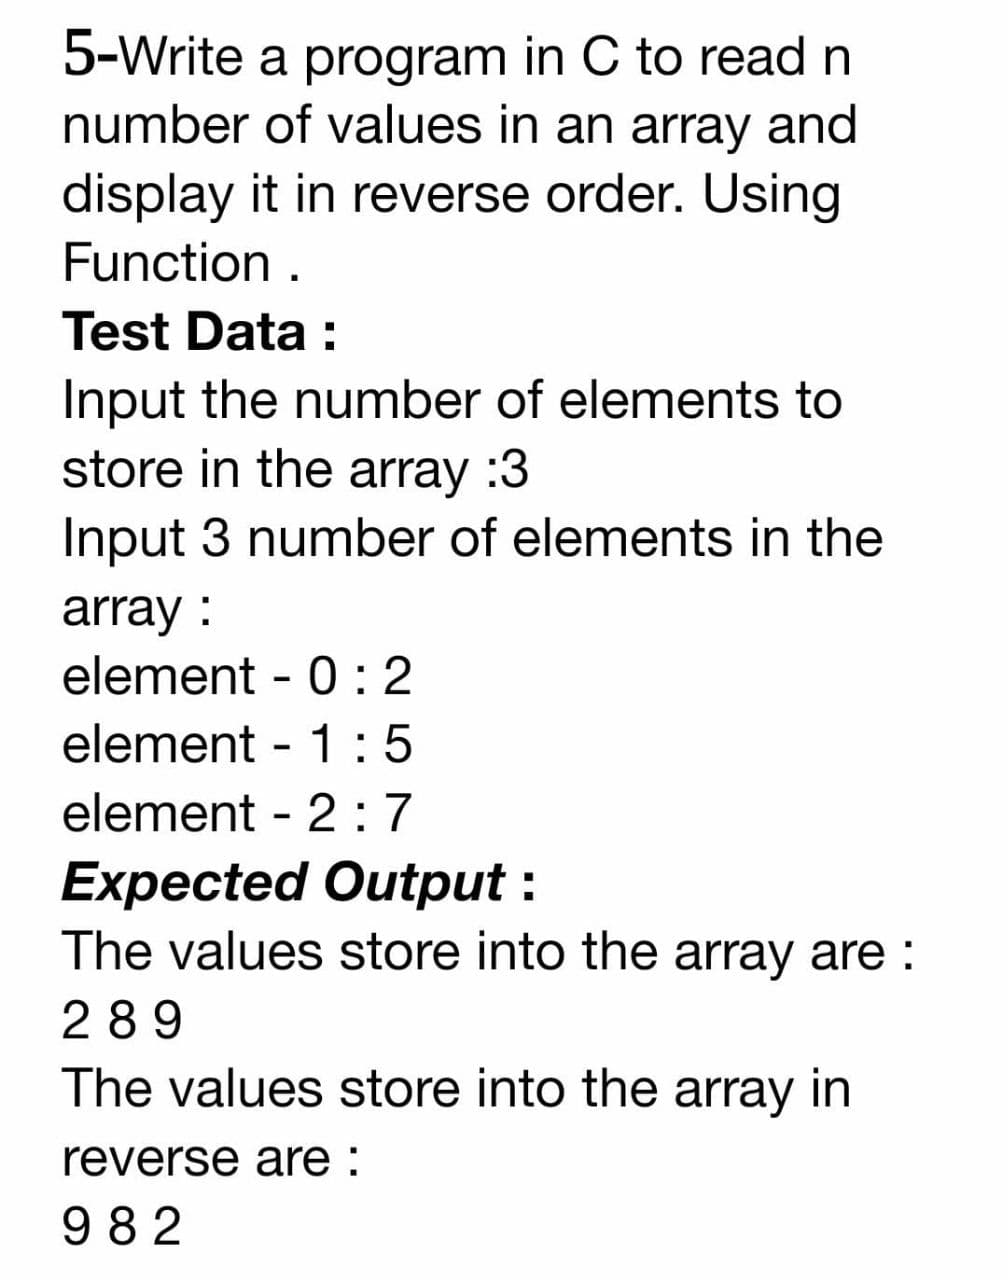 5-Write a program in C to read n
number of values in an array and
display it in reverse order. Using
Function .
Test Data :
Input the number of elements to
store in the array :3
Input 3 number of elements in the
array :
element - 0 : 2
element - 1 :5
element - 2: 7
Expected Output :
The values store into the array are :
289
The values store into the array in
reverse are :
982
